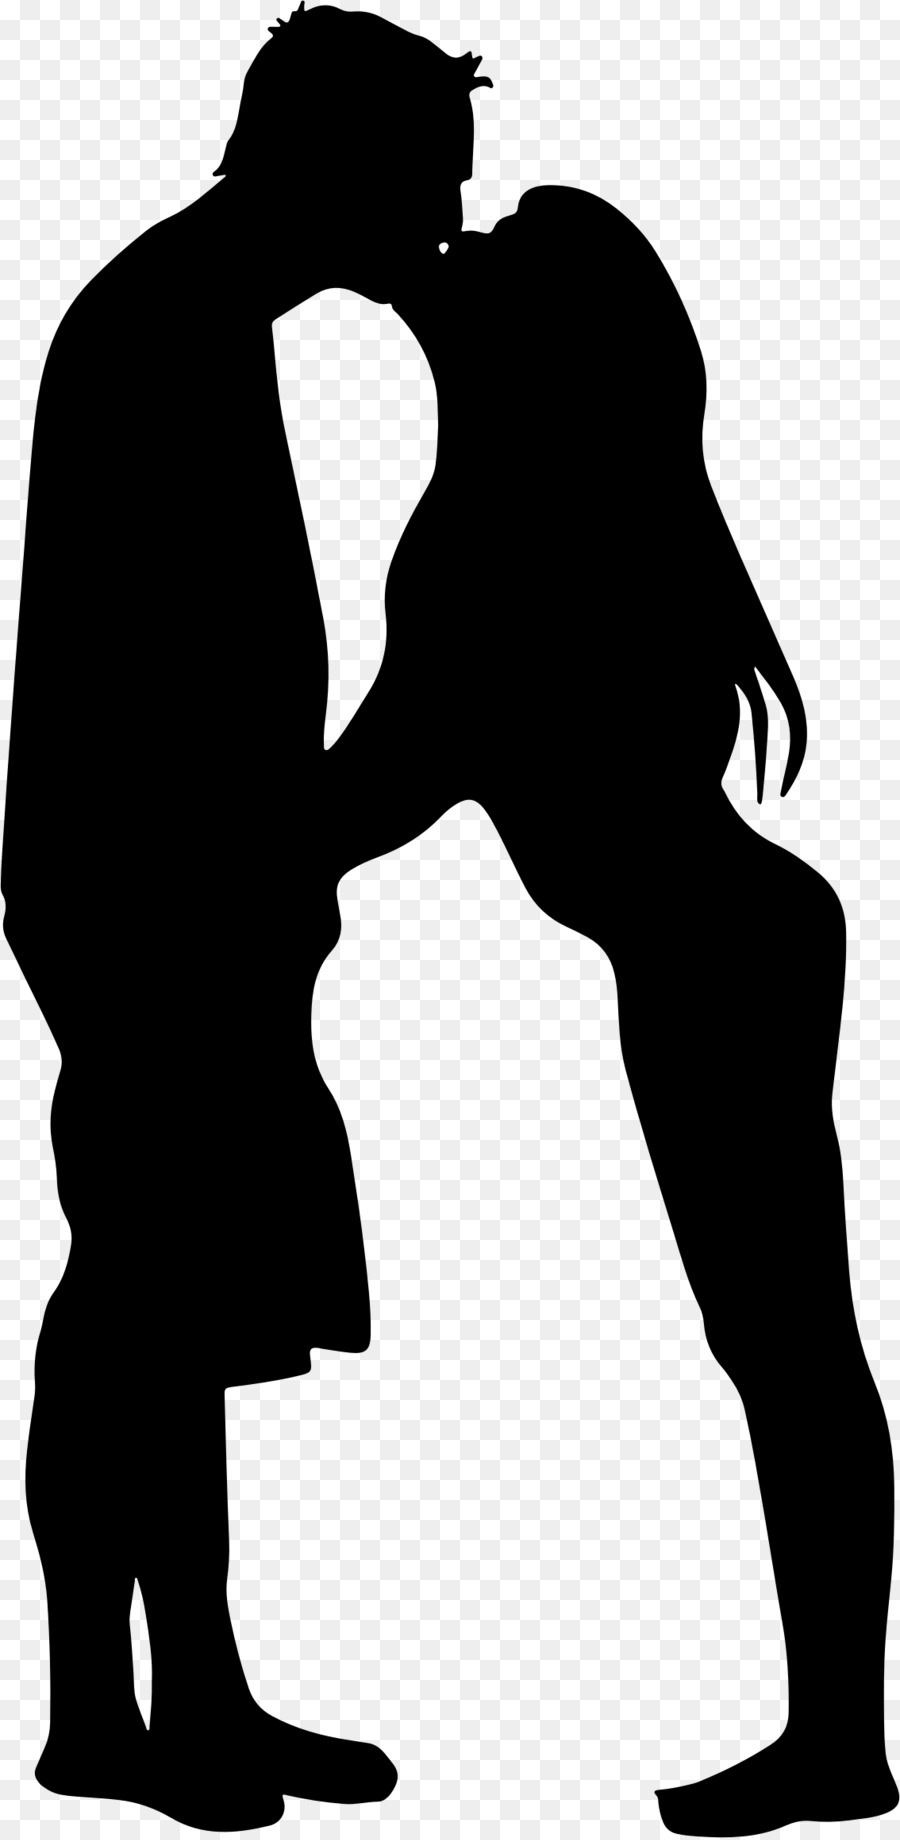 Kiss Silhouette Intimate relationship - couple png download - 1134*2316 - Free Transparent Kiss png Download.